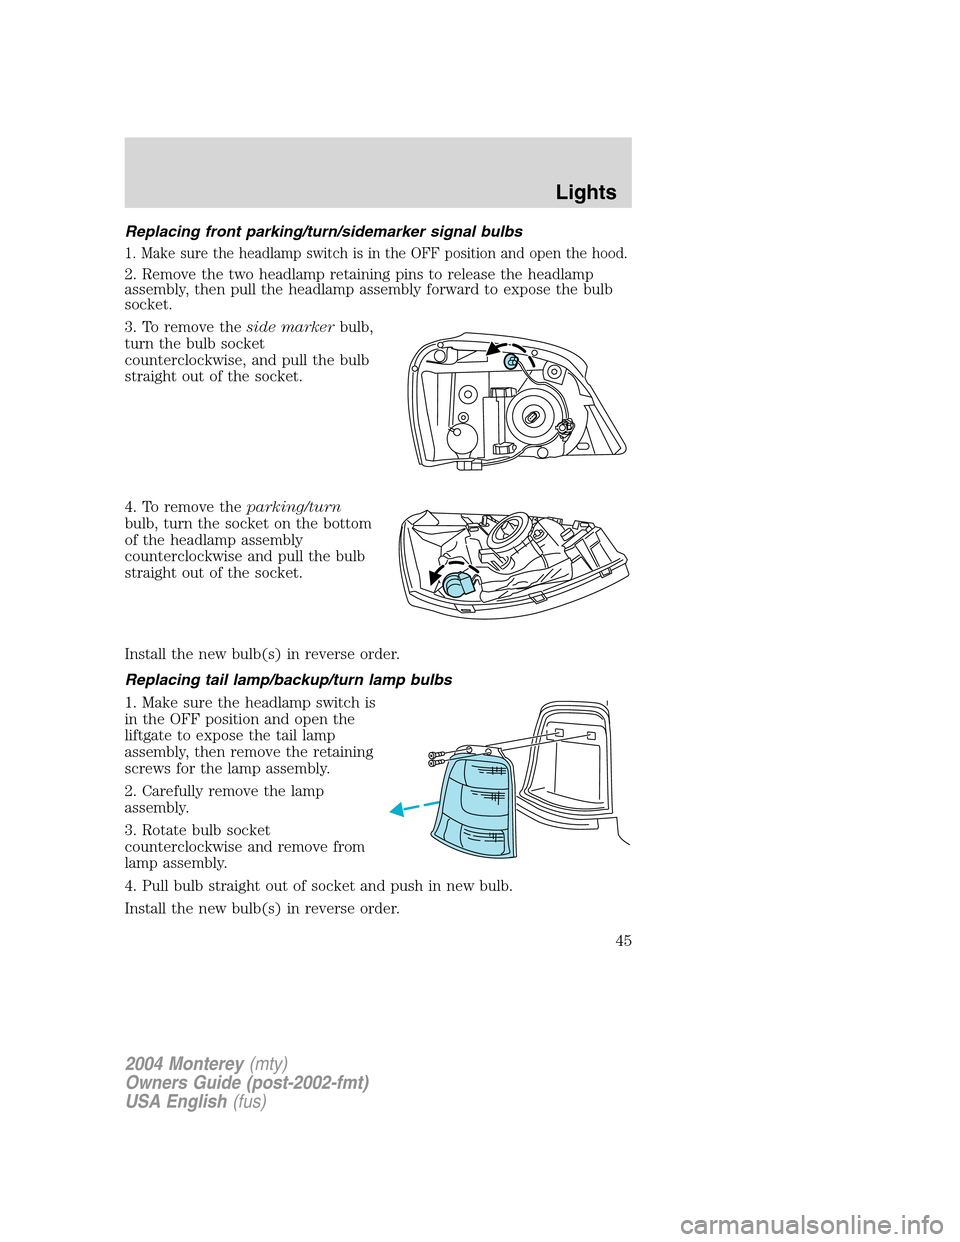 Mercury Monterey 2004  Owners Manuals Replacing front parking/turn/sidemarker signal bulbs
1. Make sure the headlamp switch is in the OFF position and open the hood.
2. Remove the two headlamp retaining pins to release the headlamp
assemb